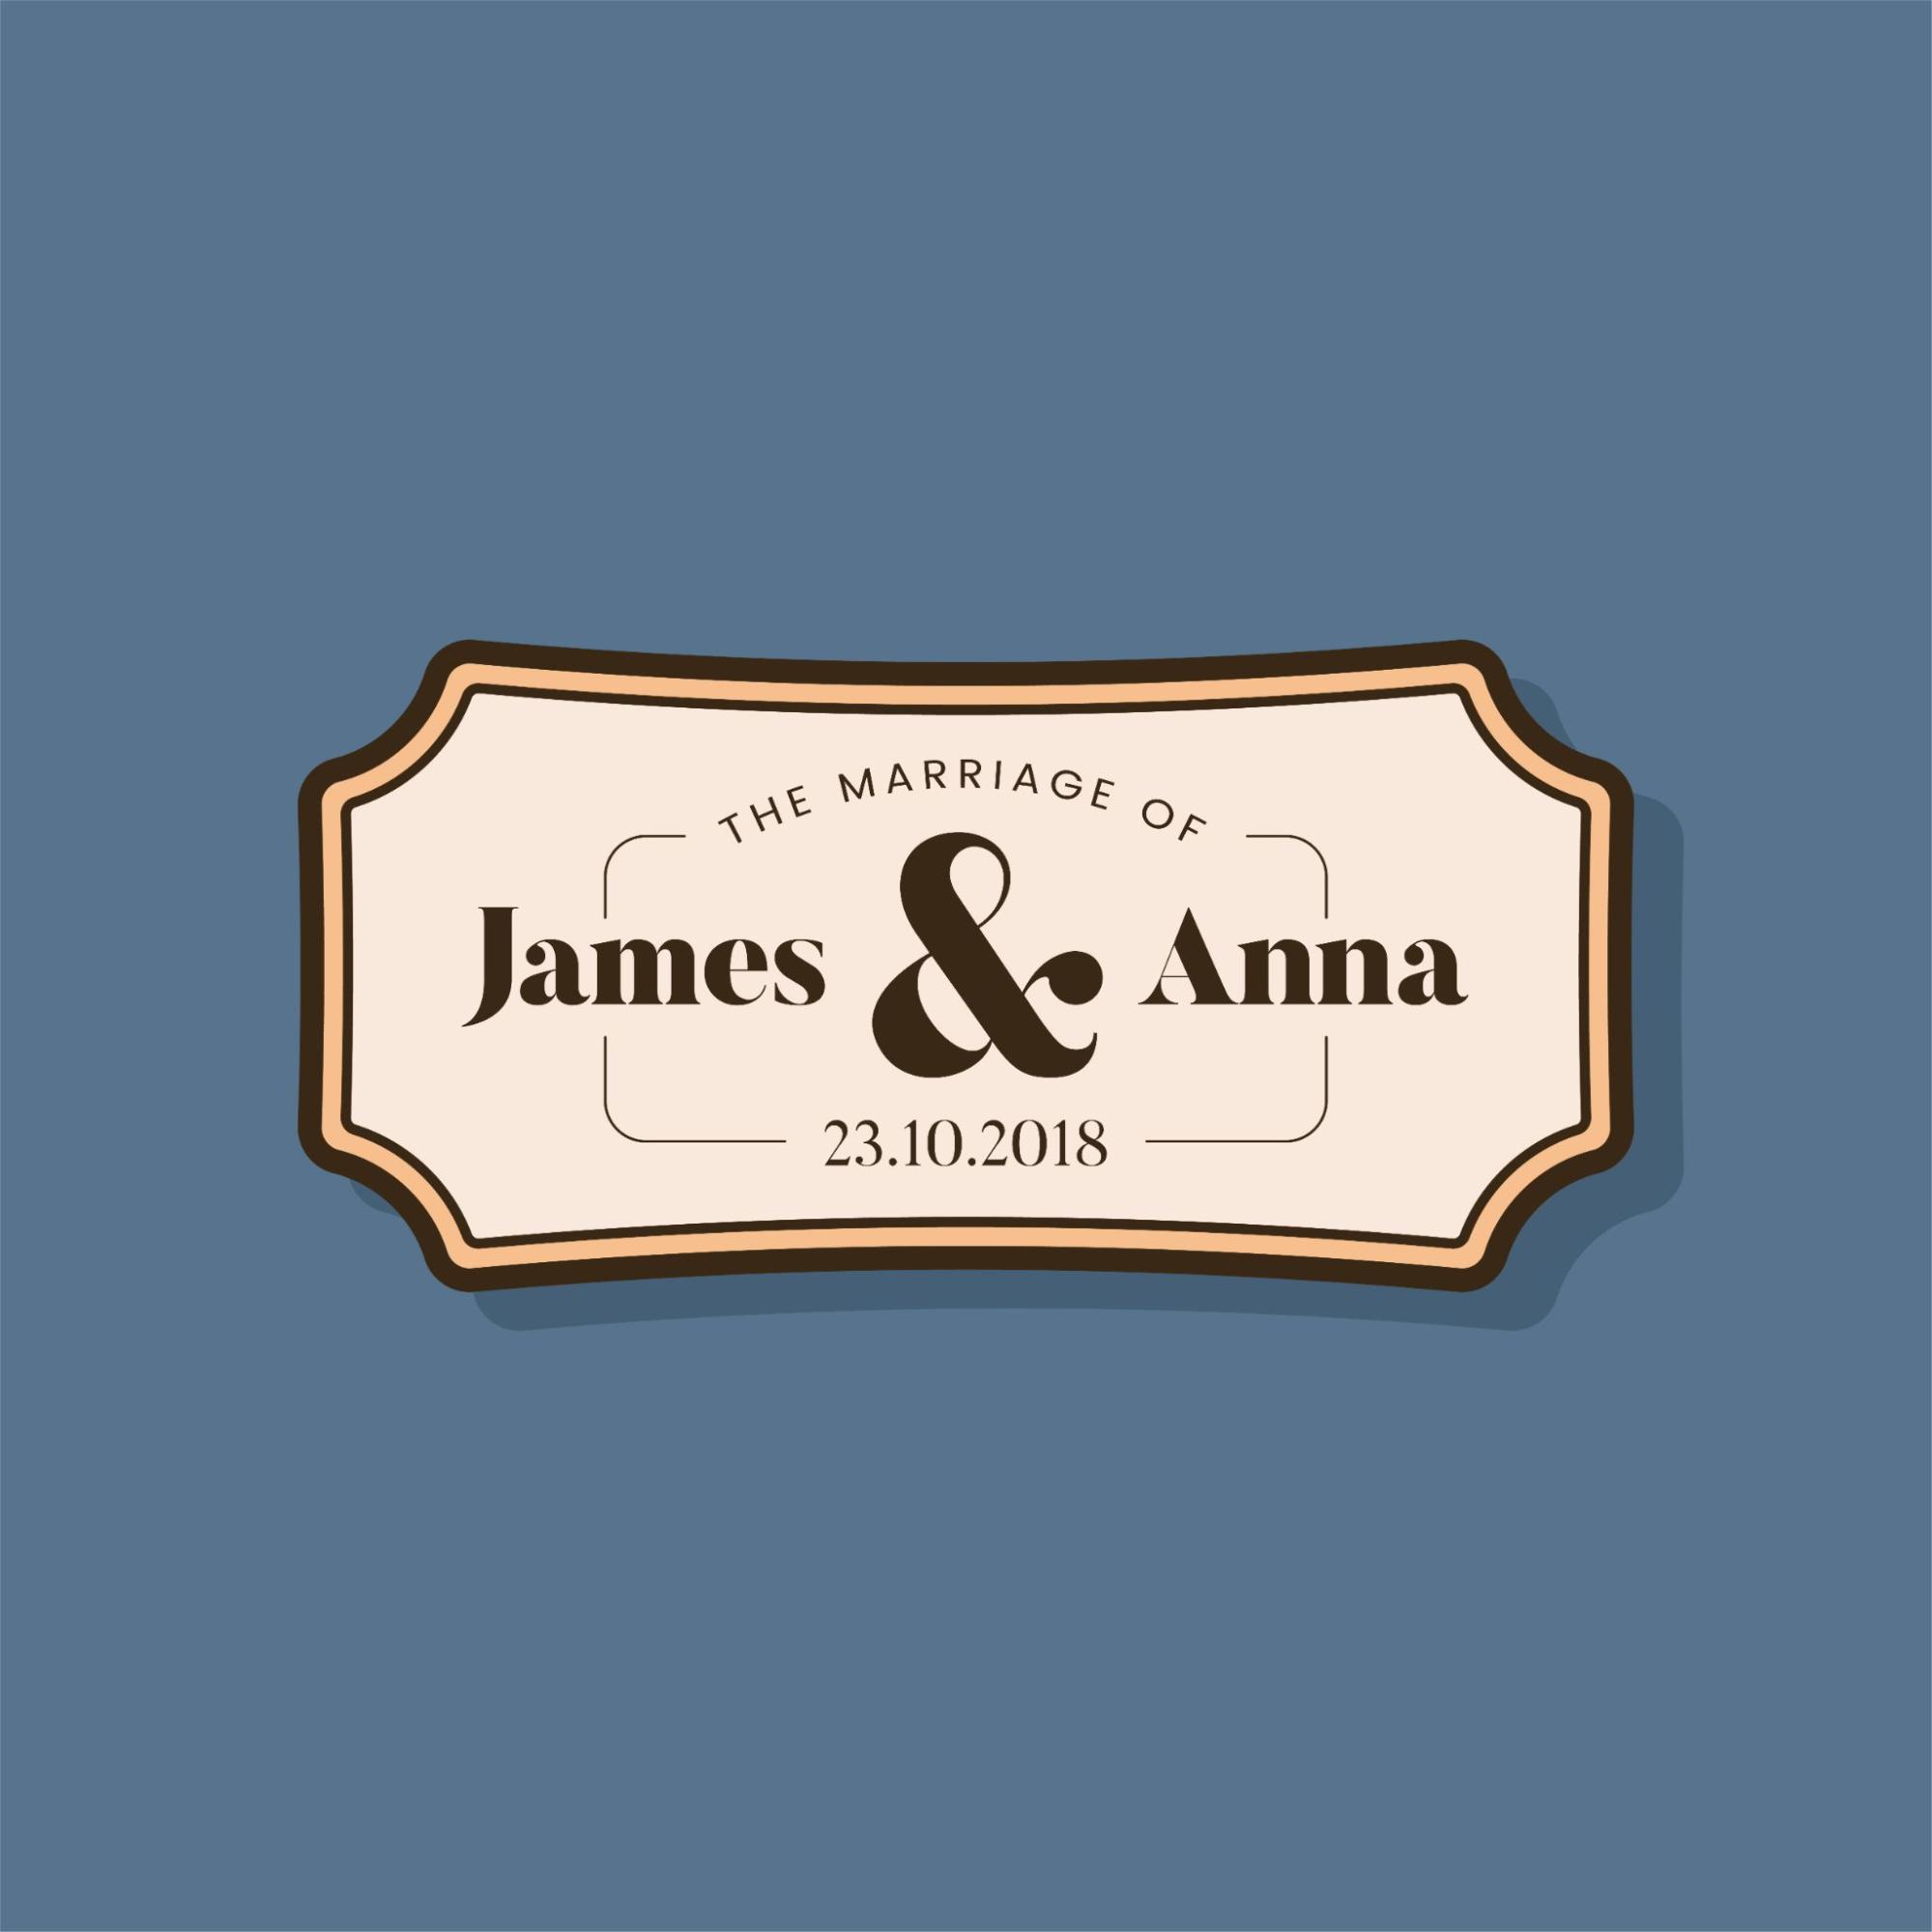 Wedding logo on blue background with a label, featuring a professional design for Family Name Sign Anniversary Gifts